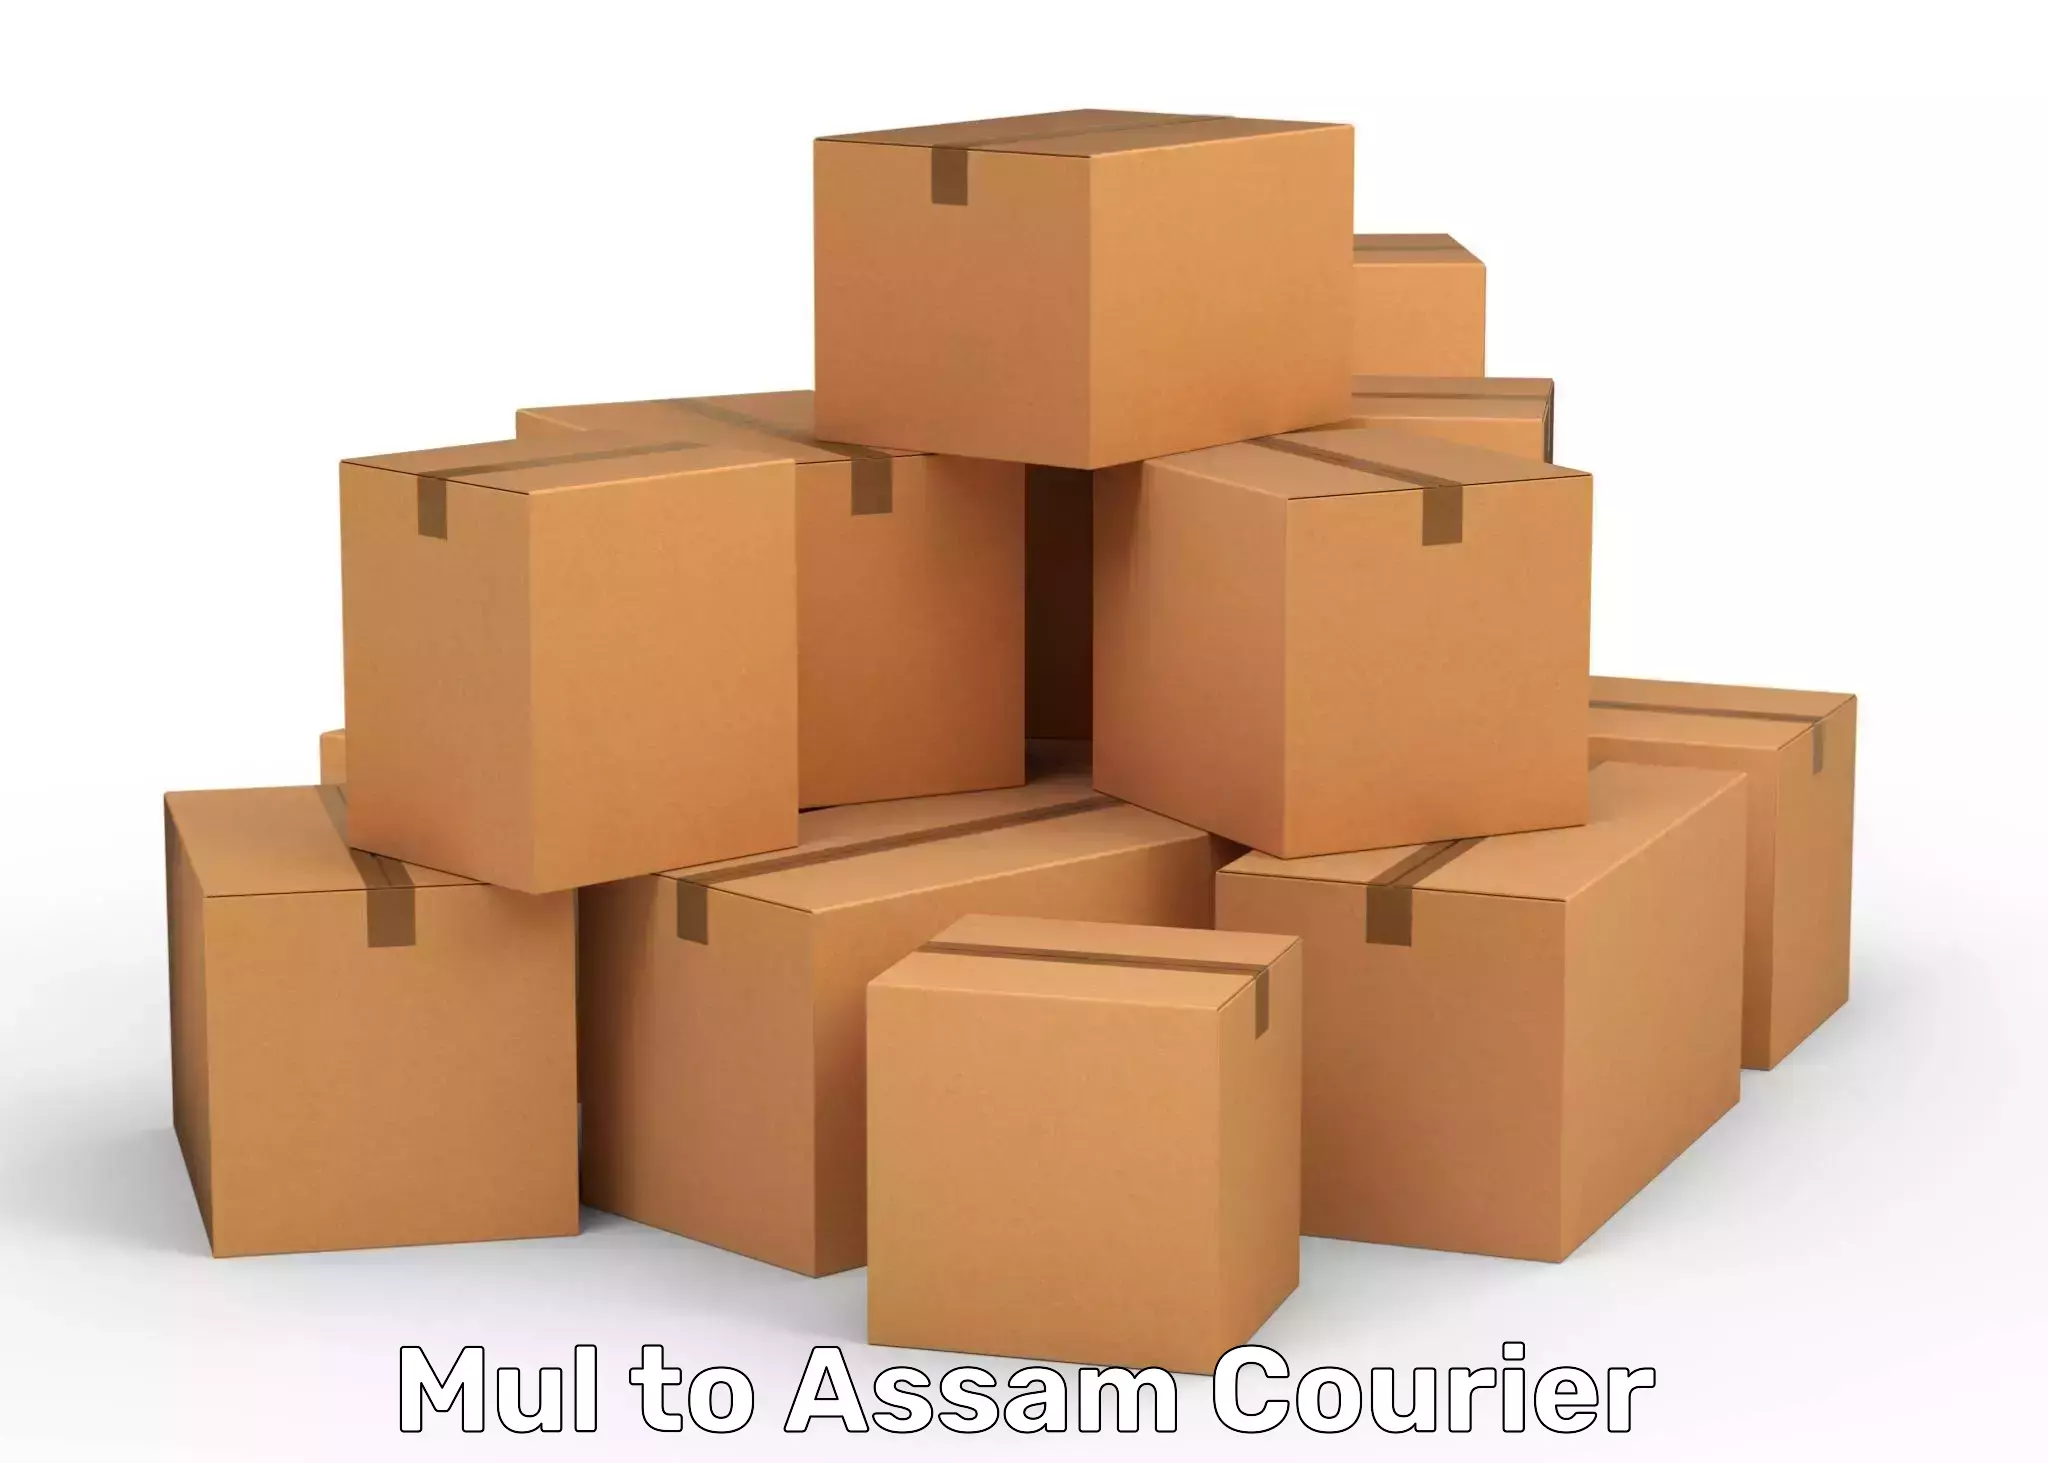 State-of-the-art courier technology Mul to Dima Hasao